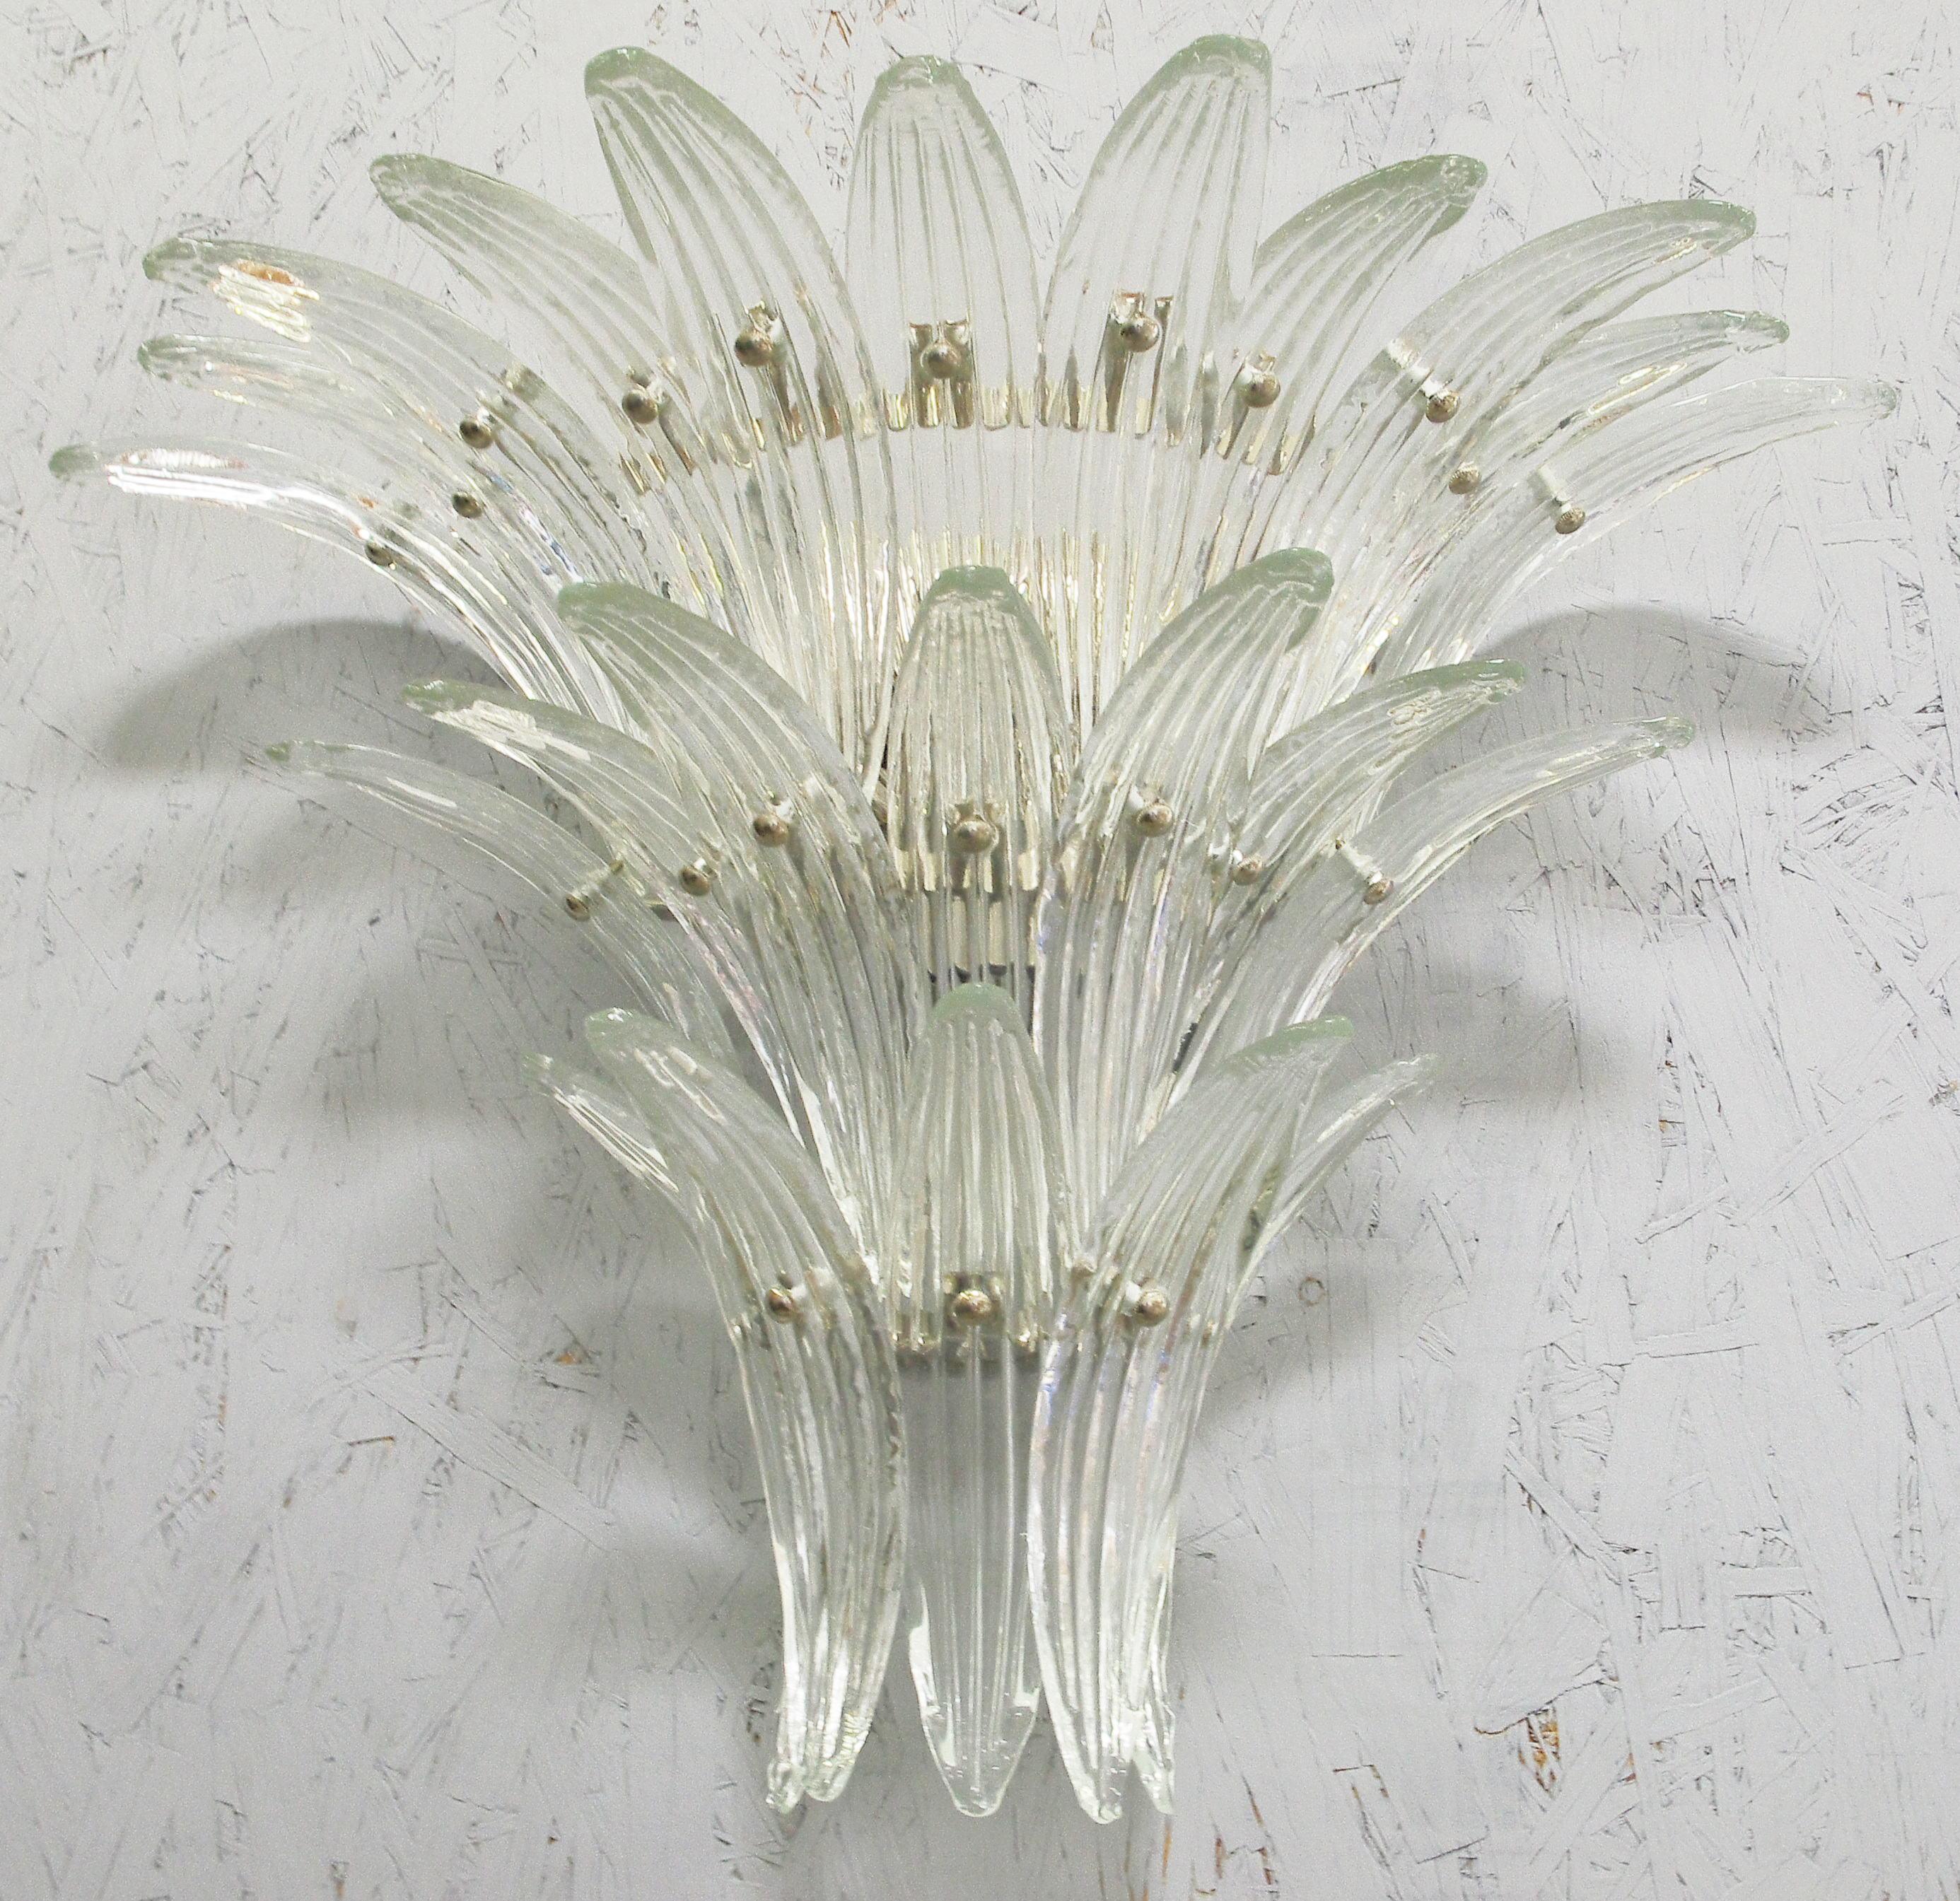 Italian Palmette wall light with 23 clear Murano glass leaves, mounted on chrome finish metal frame by Fabio Ltd / Made in Italy
3 lights / E12 or E14 type / max 40W each
Width: 27 inches / Height: 20 inches / Depth: 10 inches
Order only / This item